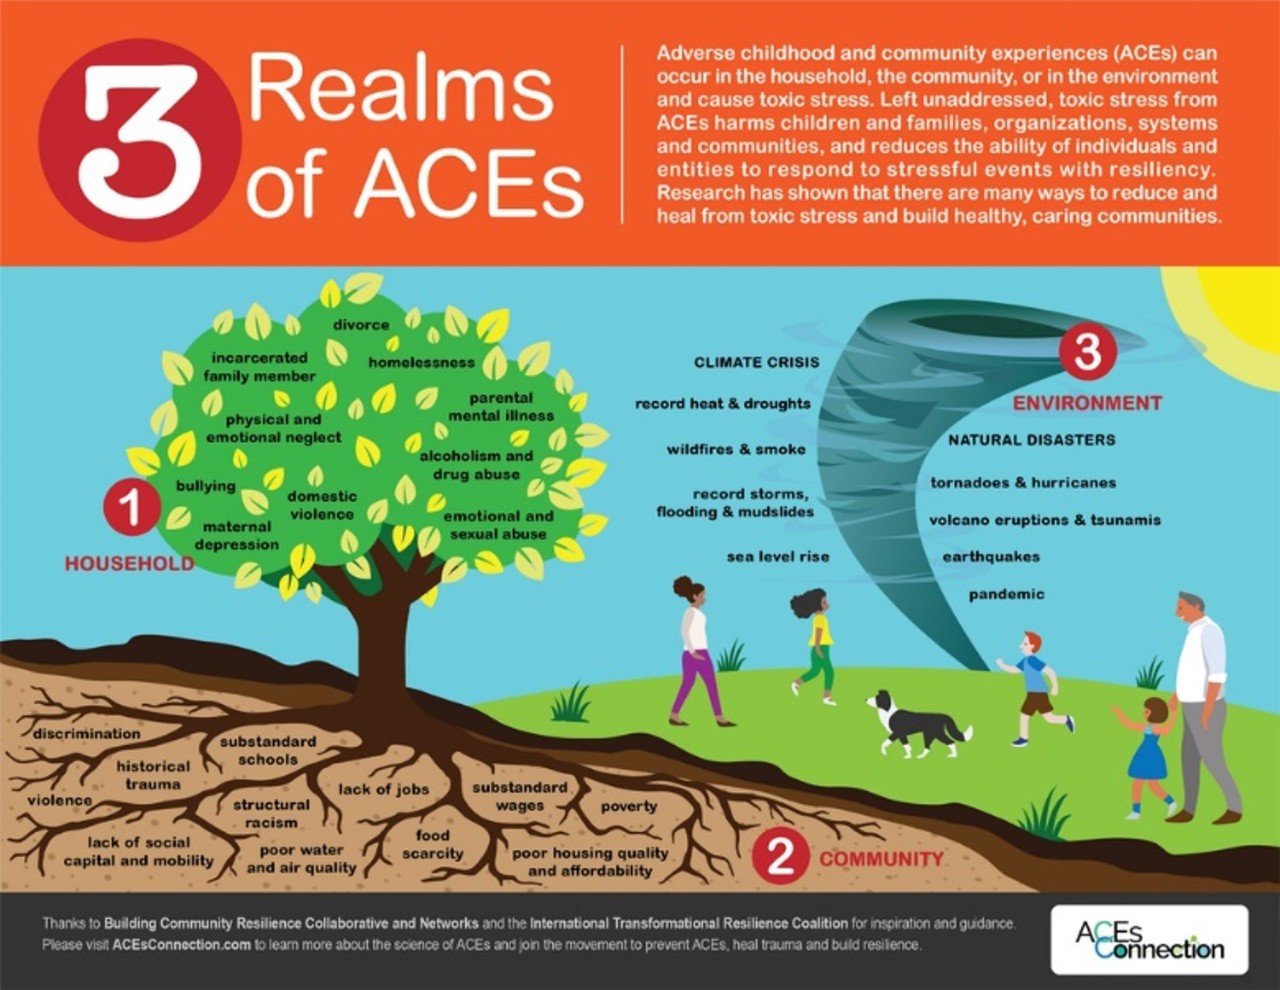 The Three Realms of Adverse Childhood Experiences